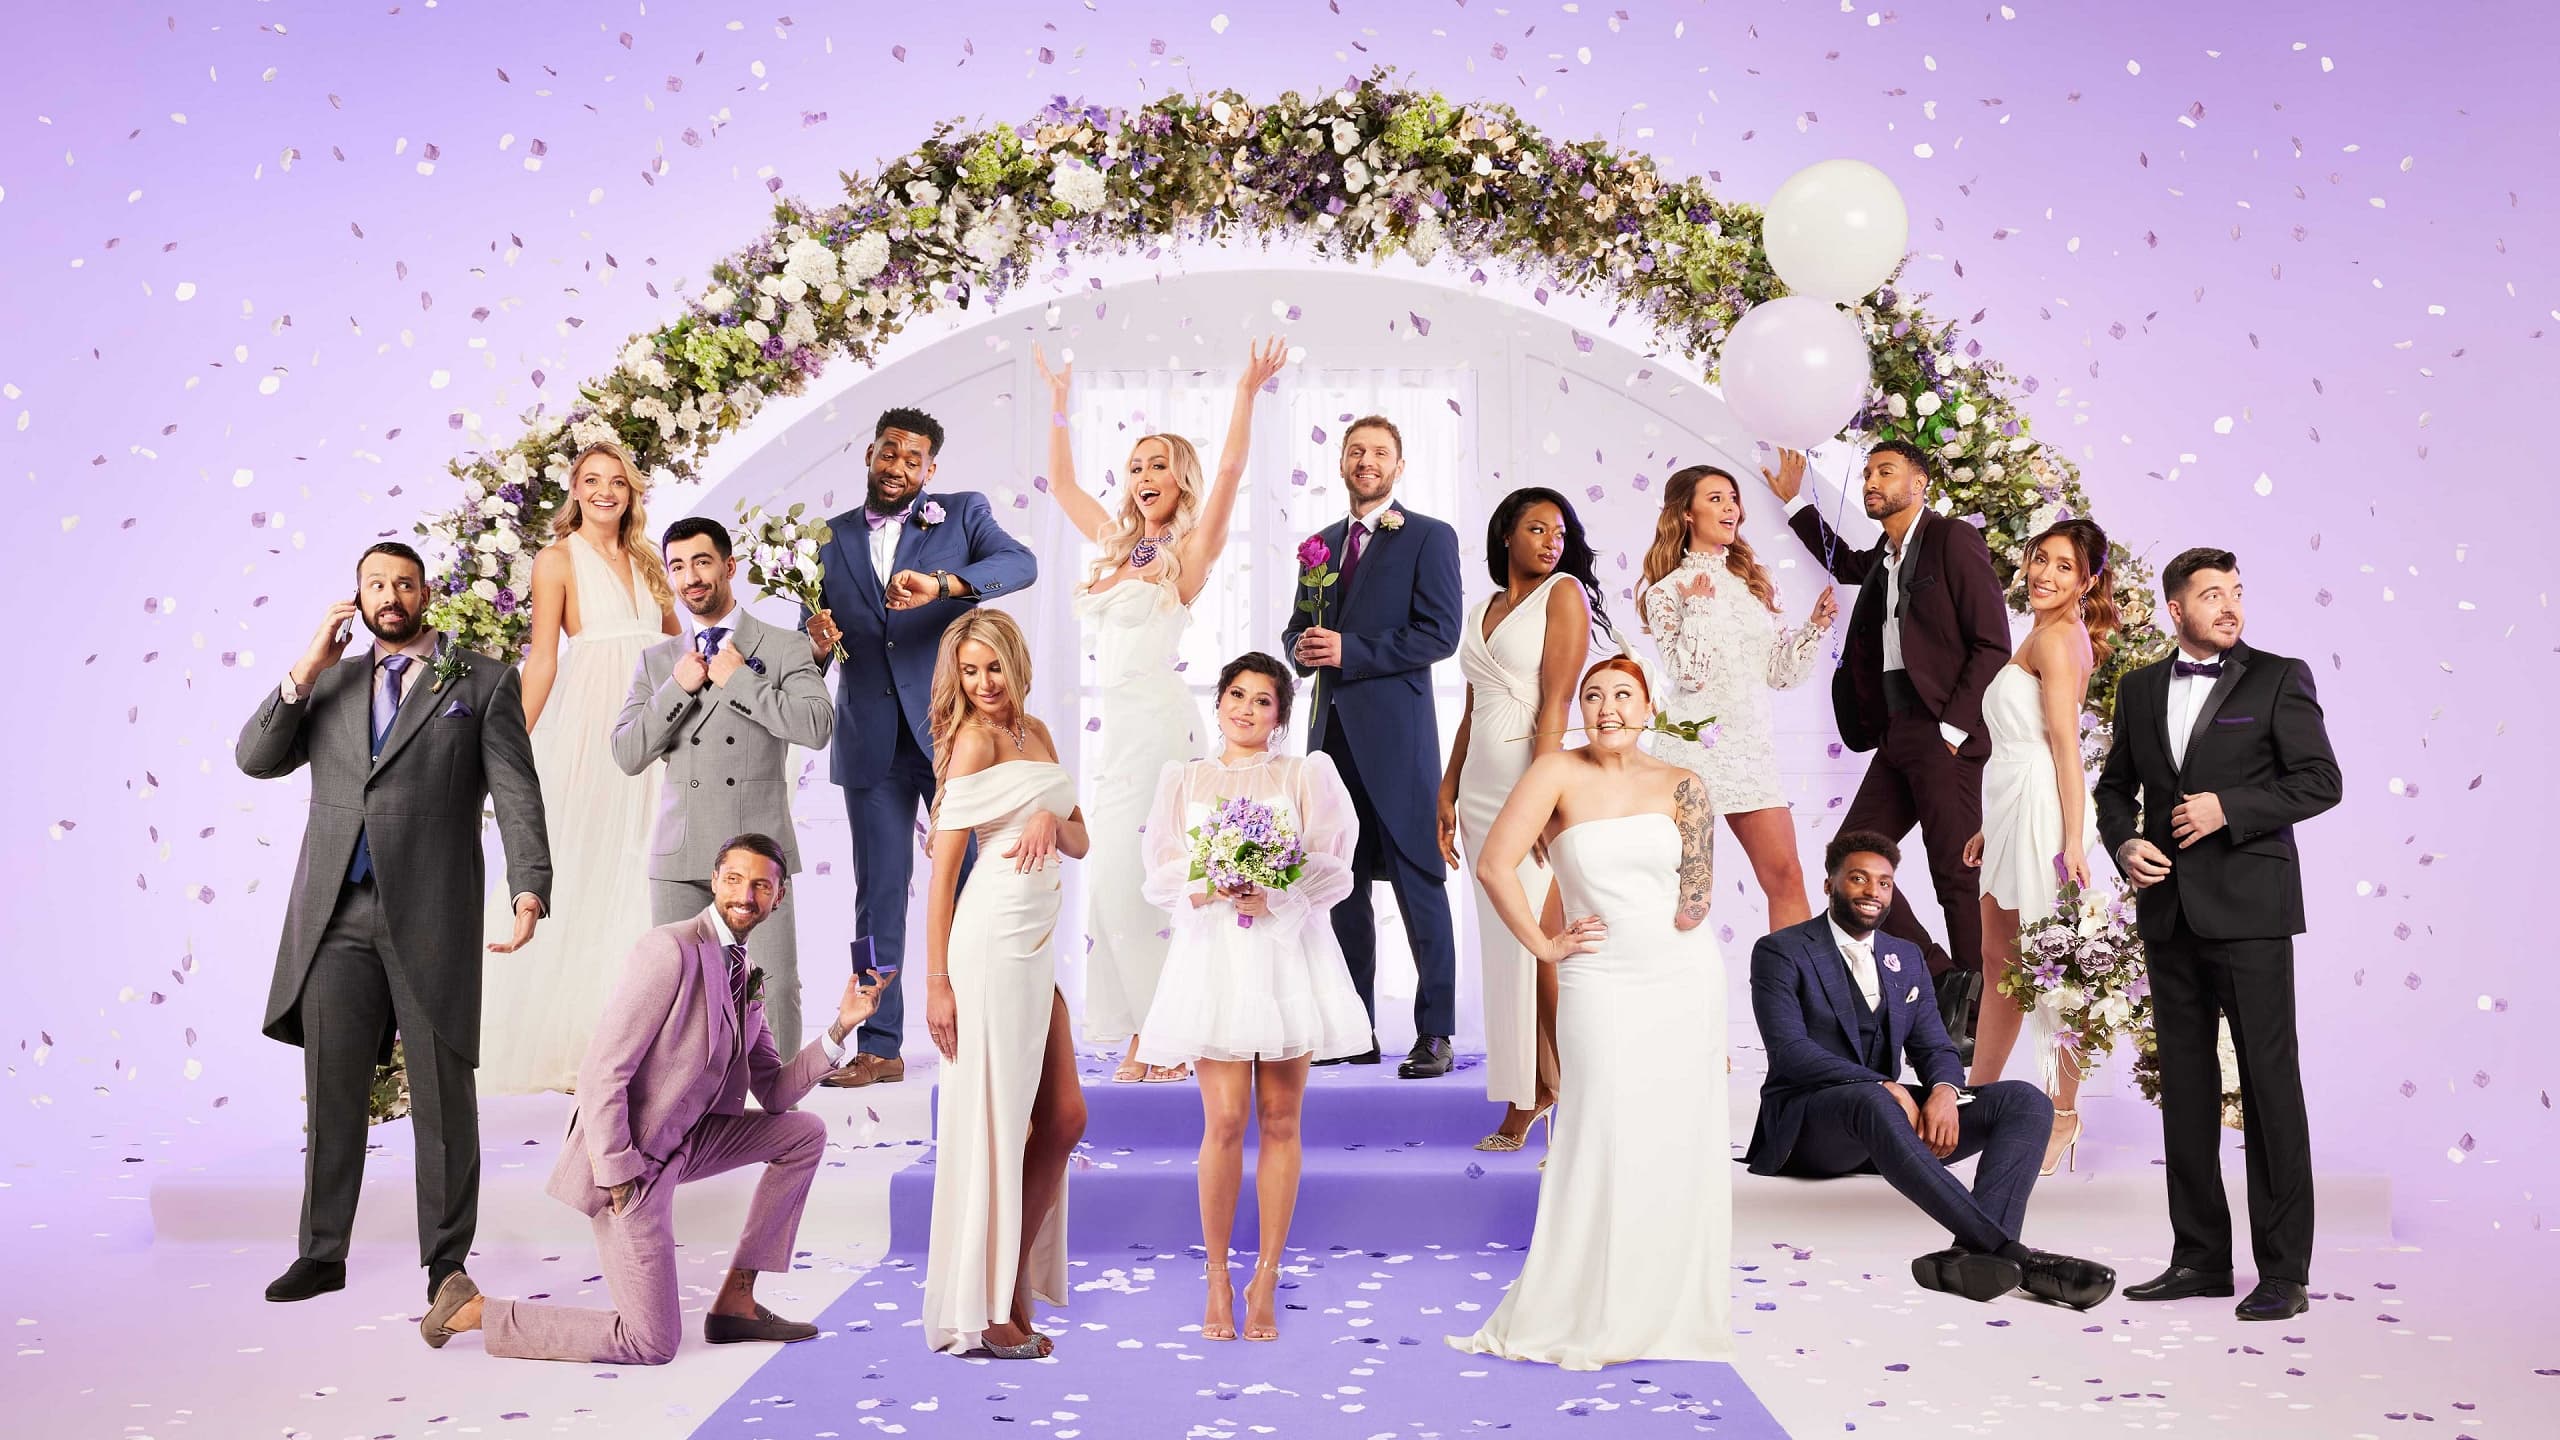 Married at First Sight UK - Season 7 Episode 27